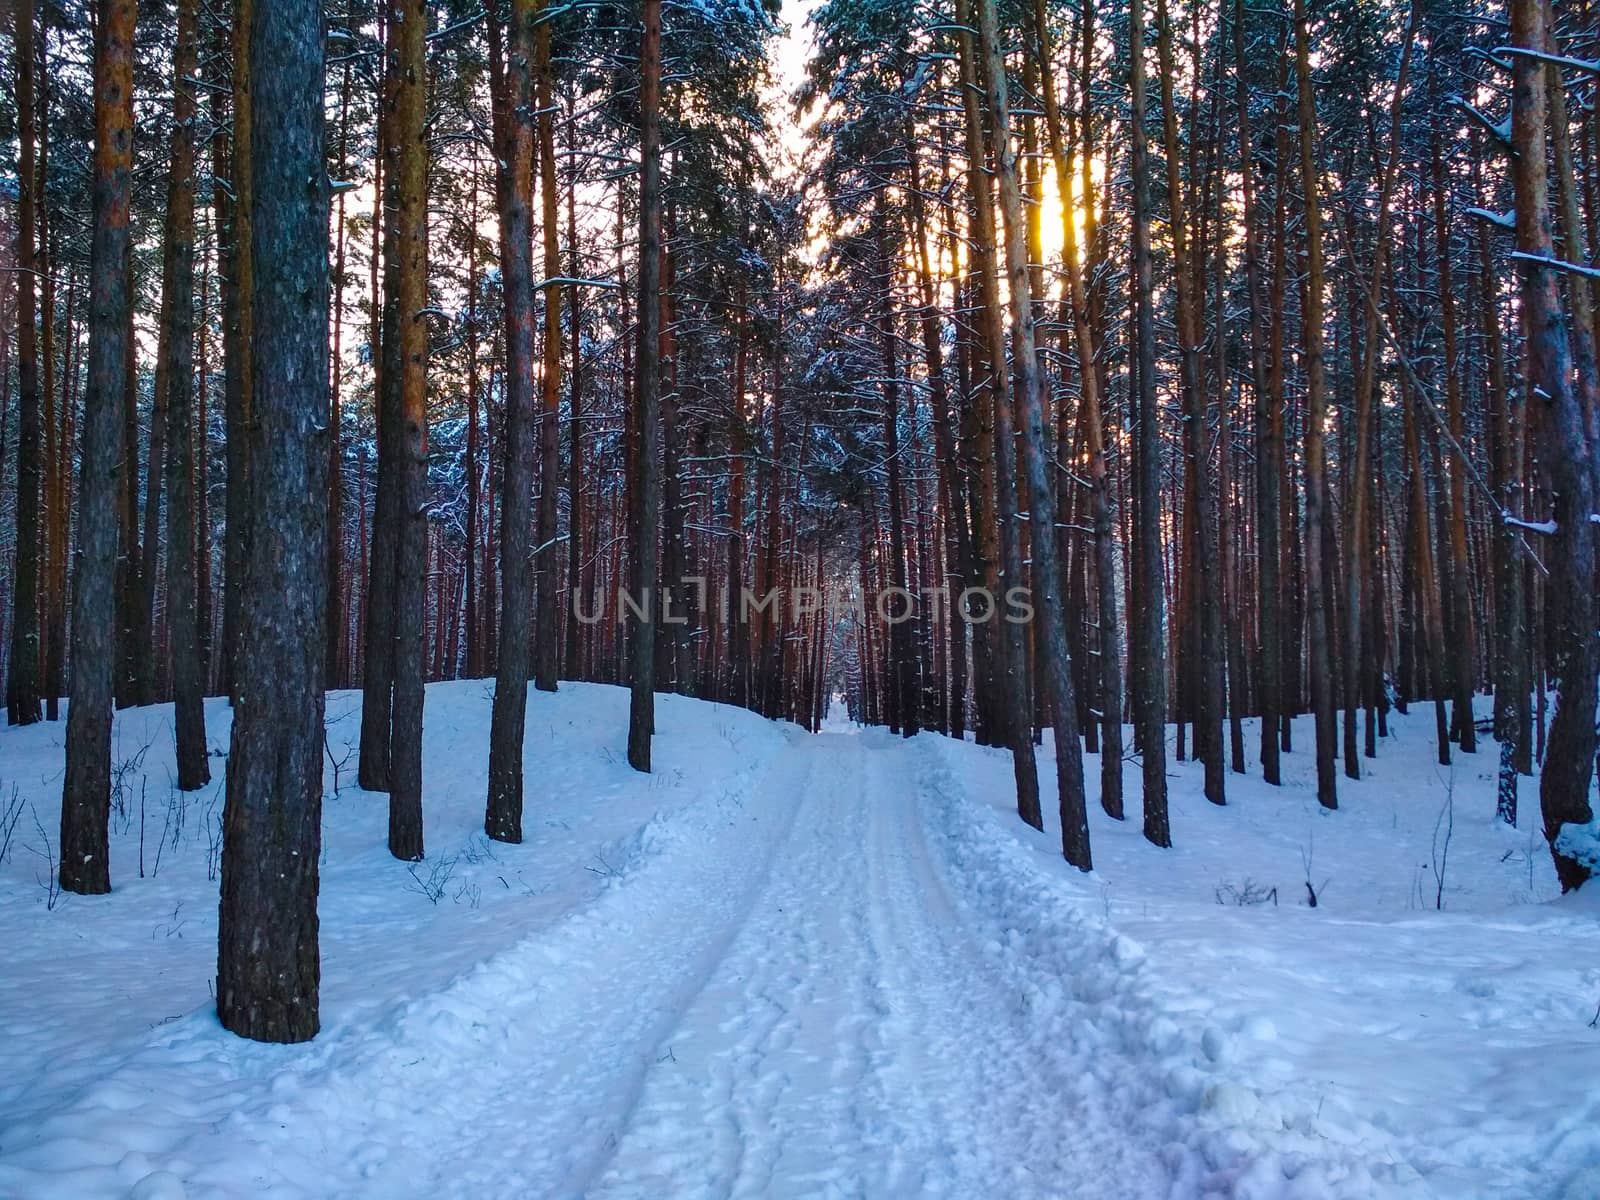 tEmpty snow covered road in winter forest landscape by mtx